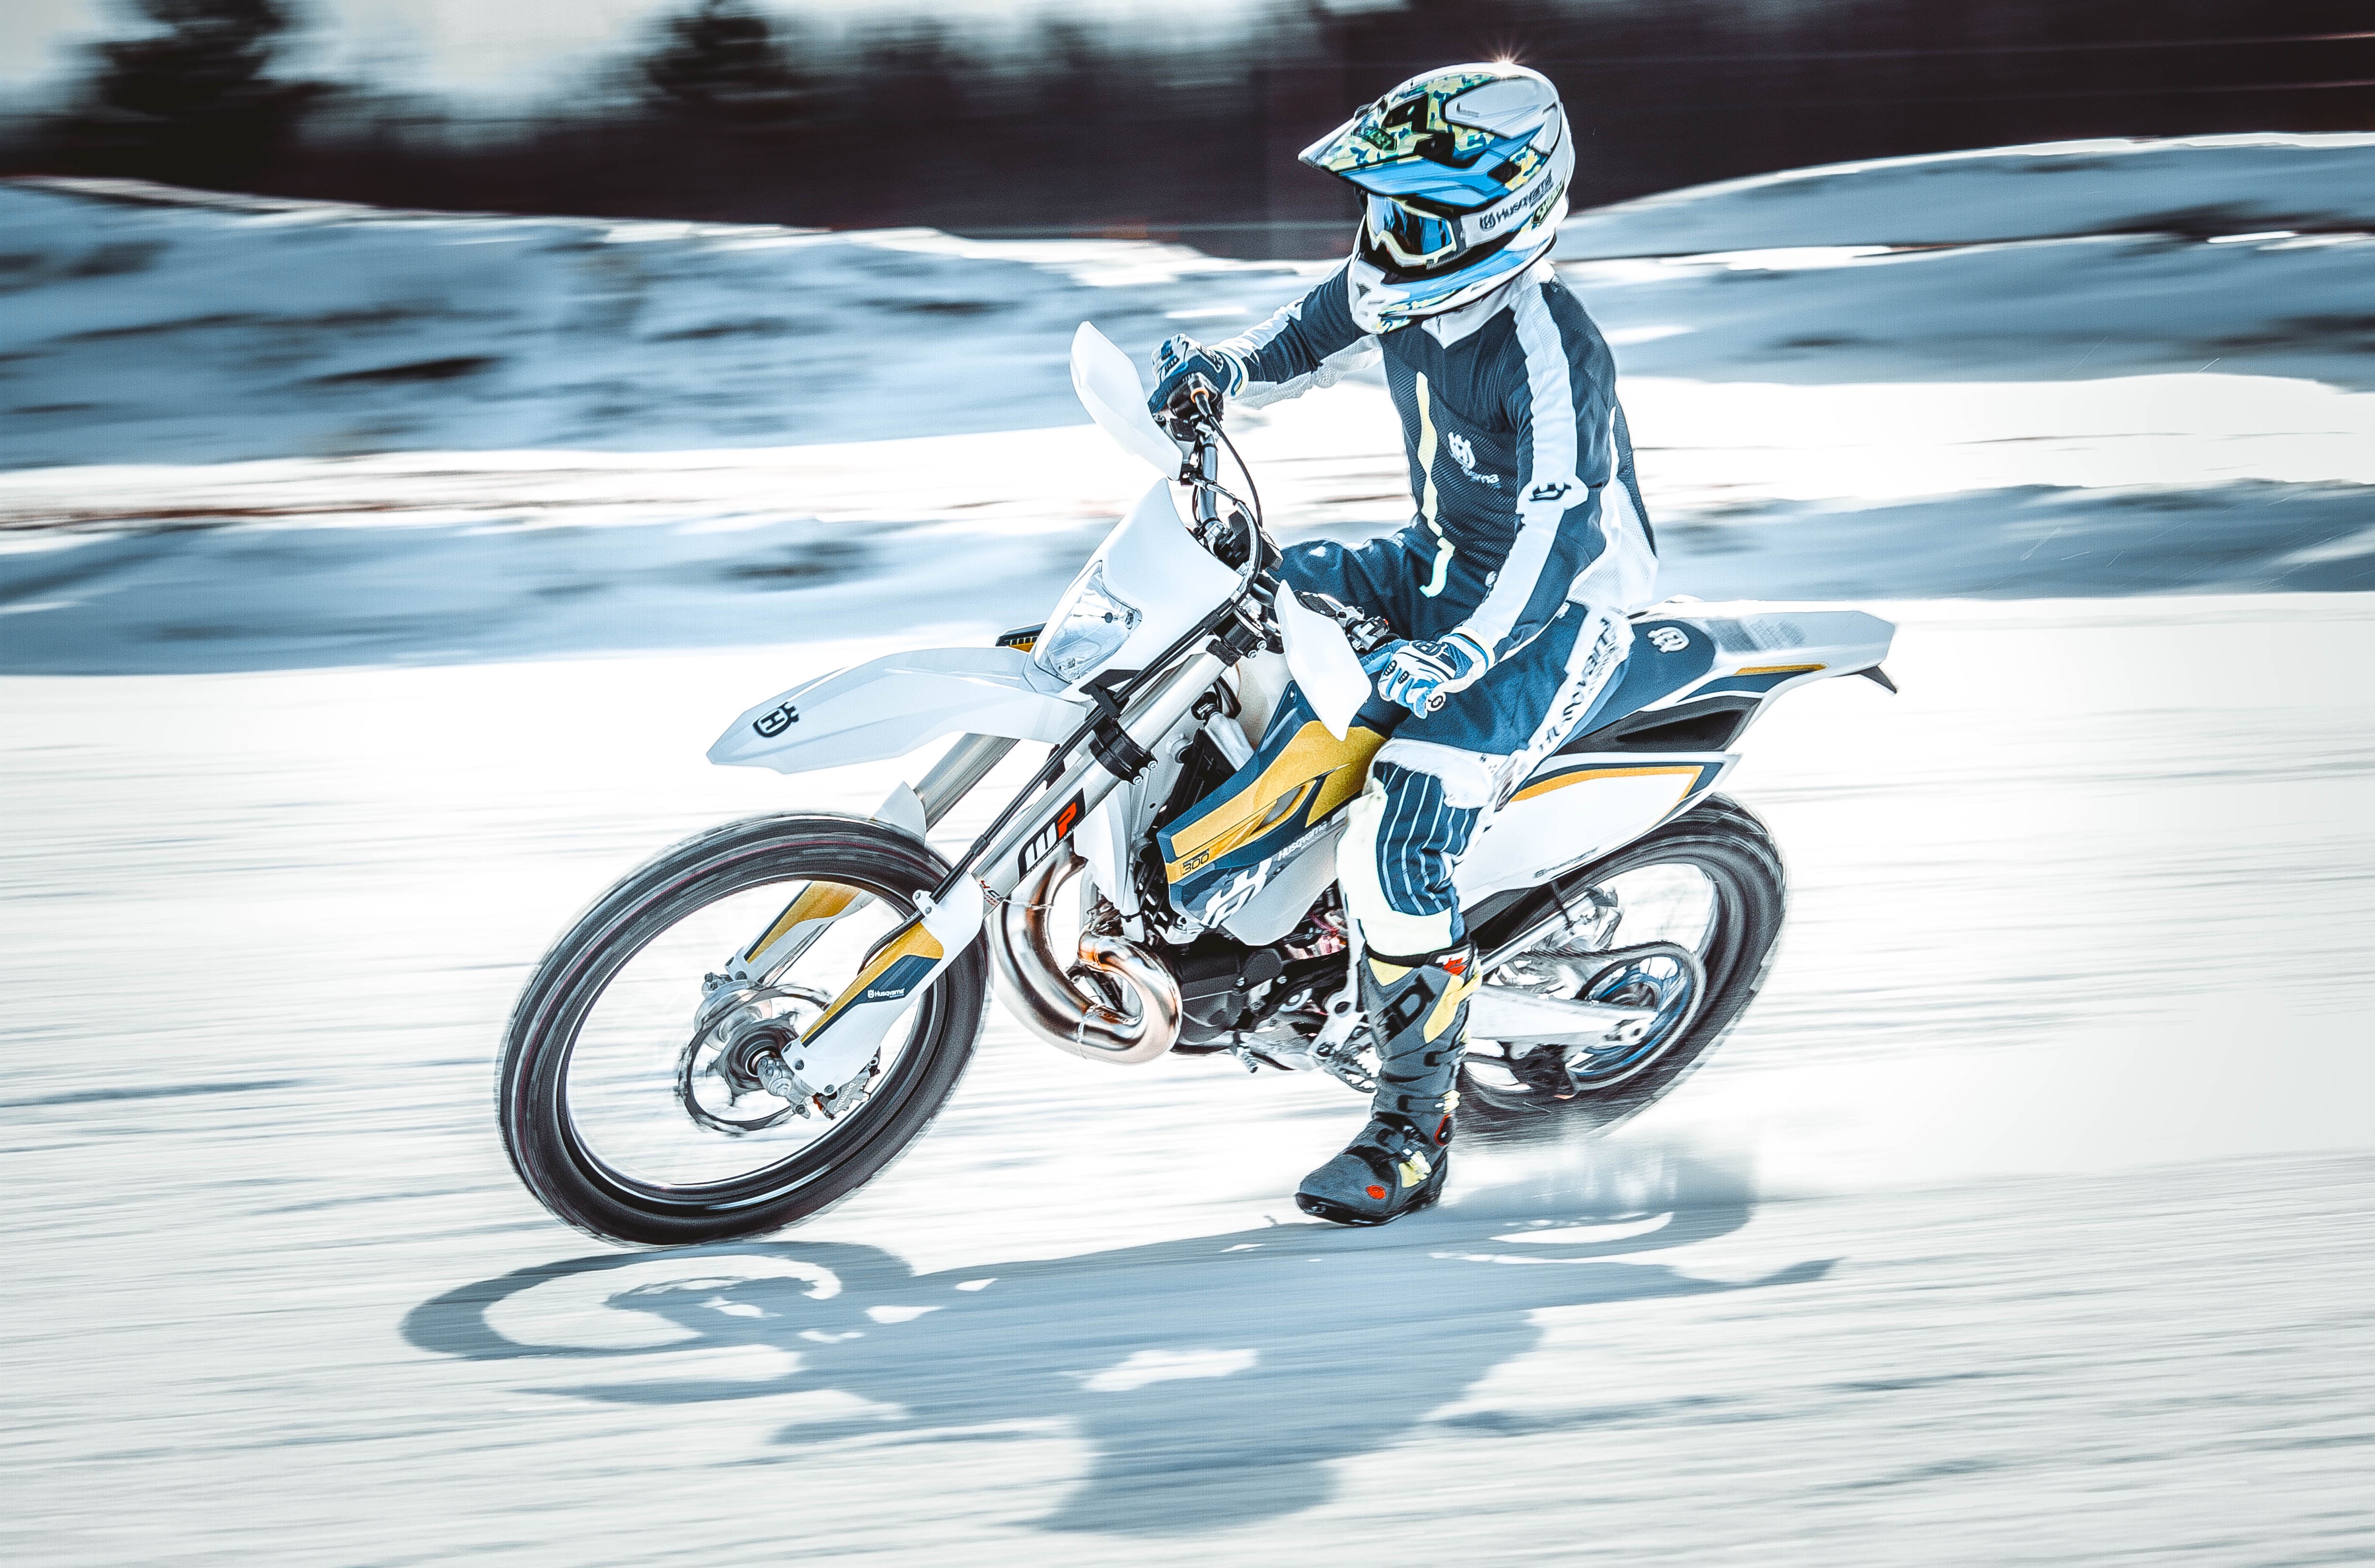 snow, motorcycles, motorcyclist, speed Image for desktop